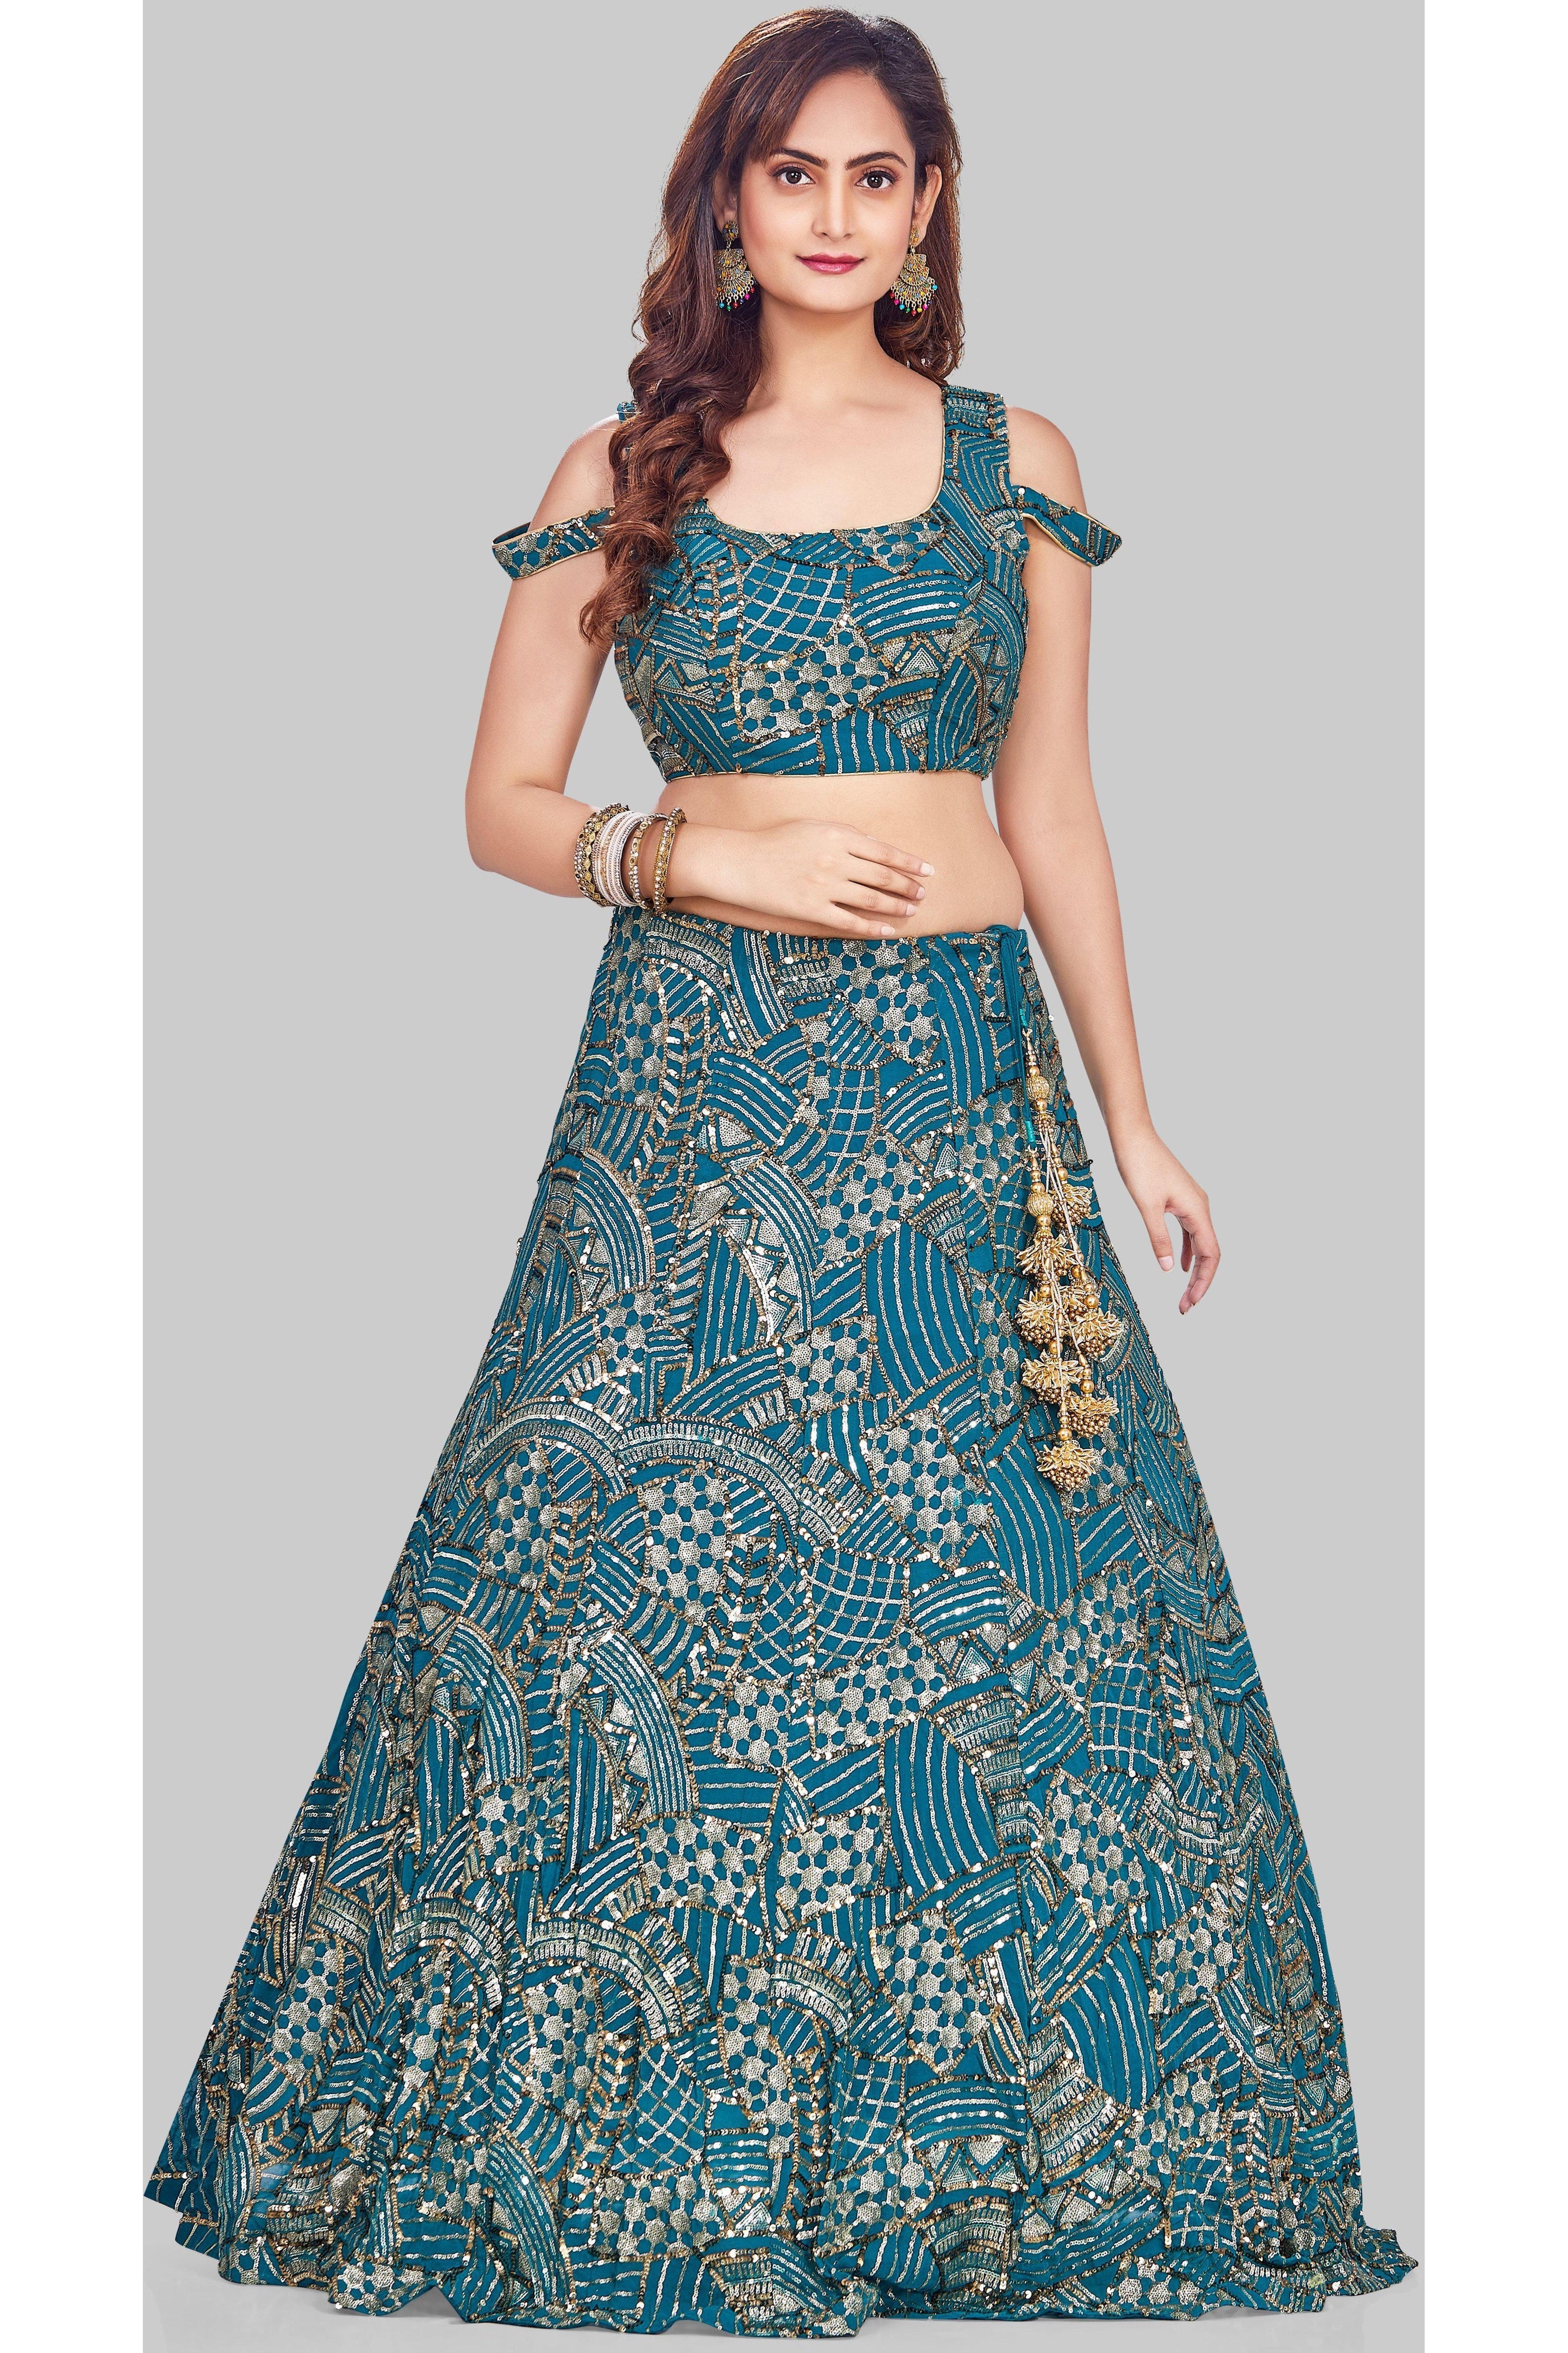 Buy Dark Teal Lehenga Choli In Net With Sequins Embroidered Floral Motifs  And Cold Shoulder Sleeves Online - Kalki Fashion